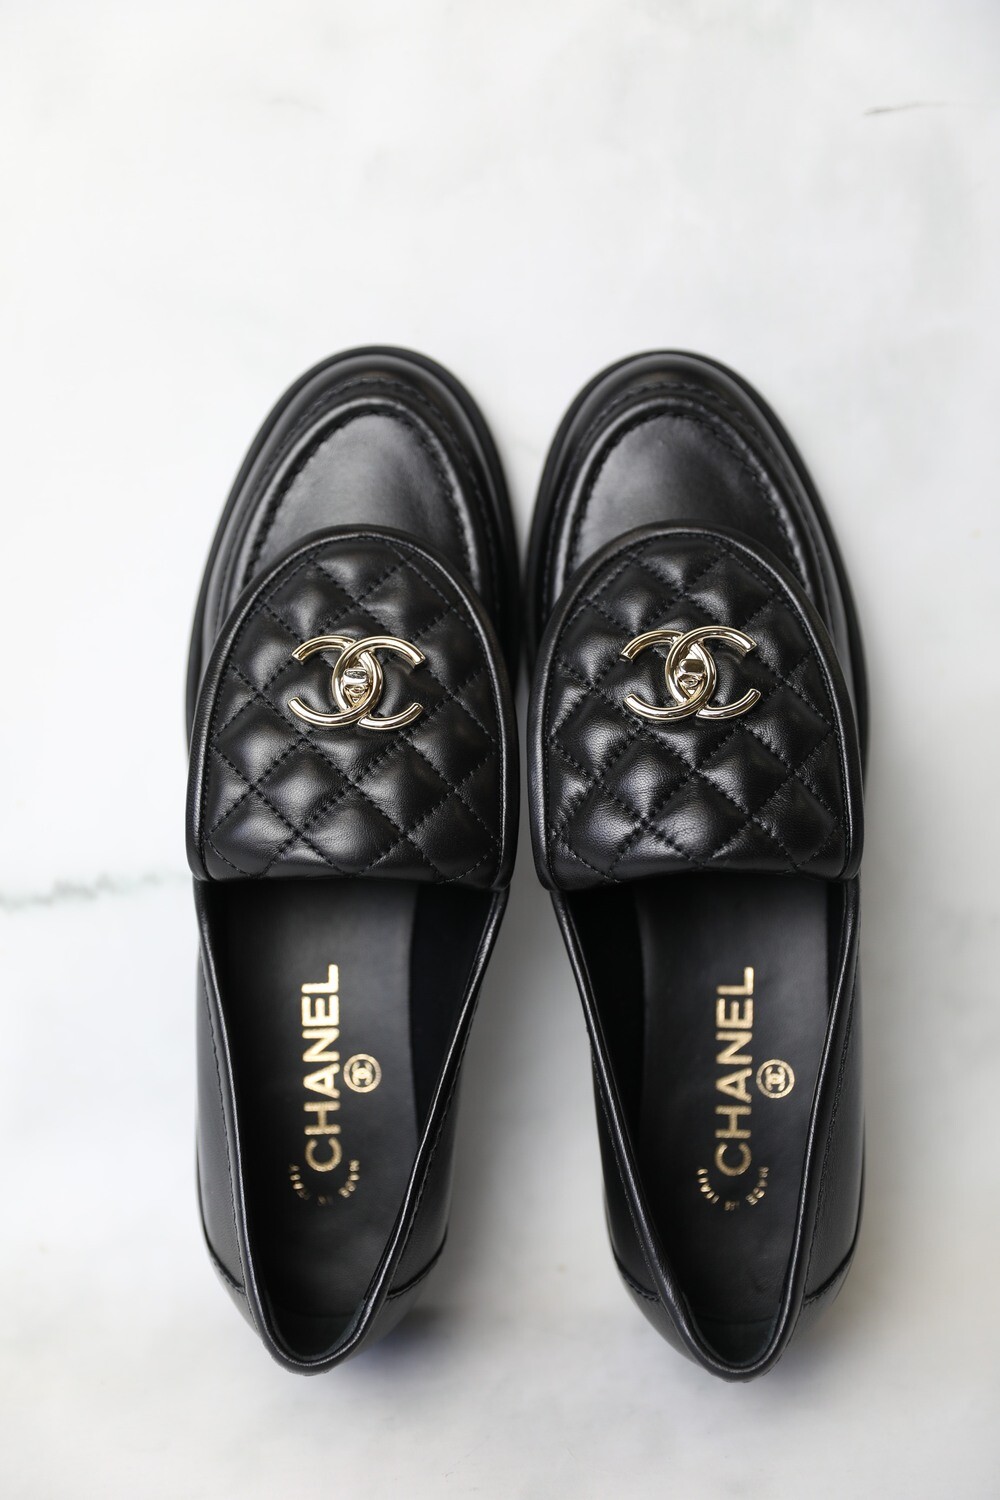 Chanel Turnlock Loafer, Black with Gold Hardware, Size 36, New in Box GA001